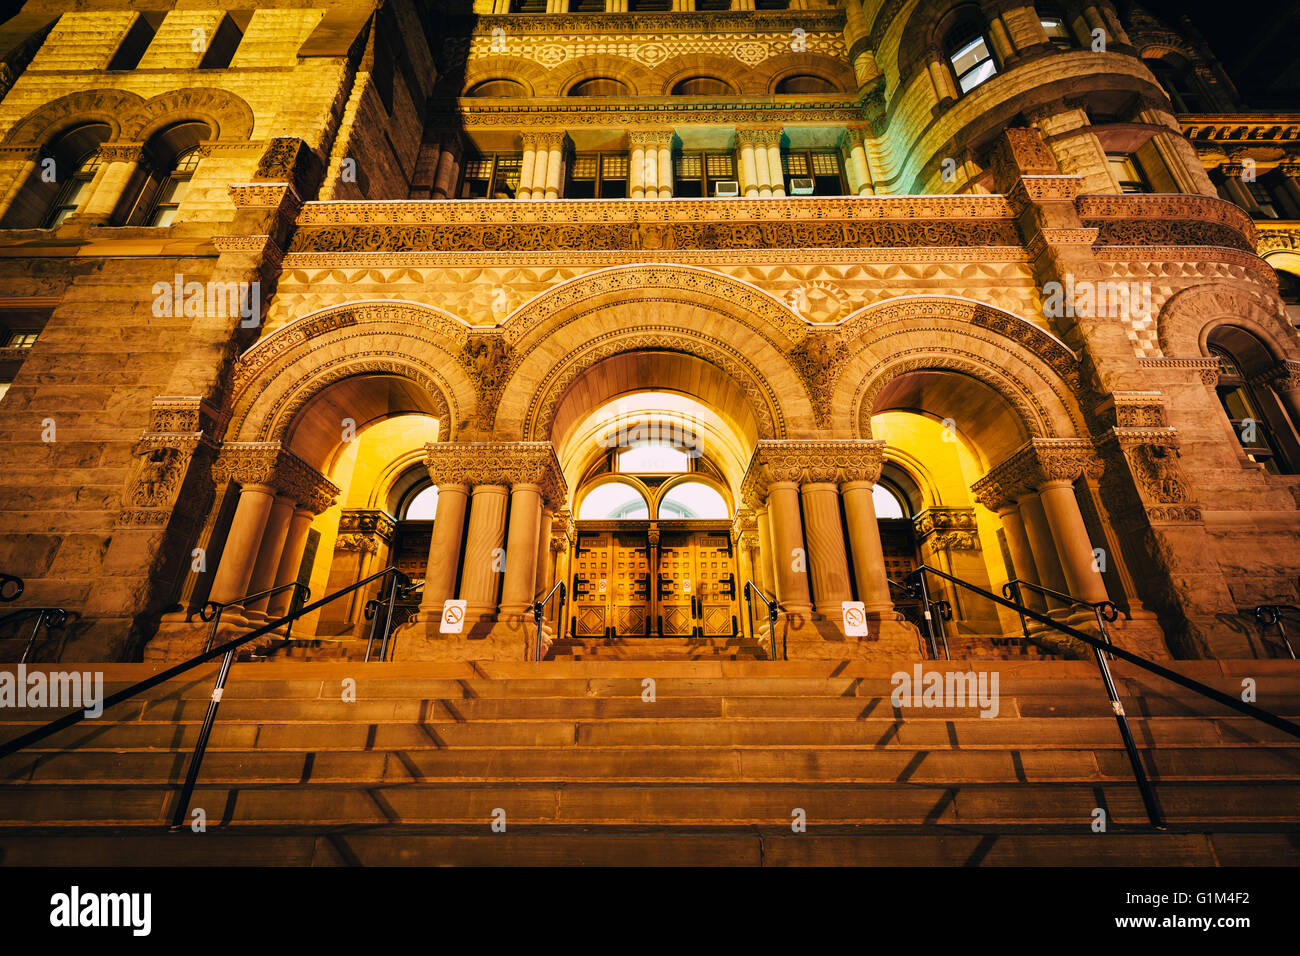 Old City Hall at night, in downtown Toronto, Ontario. Stock Photo